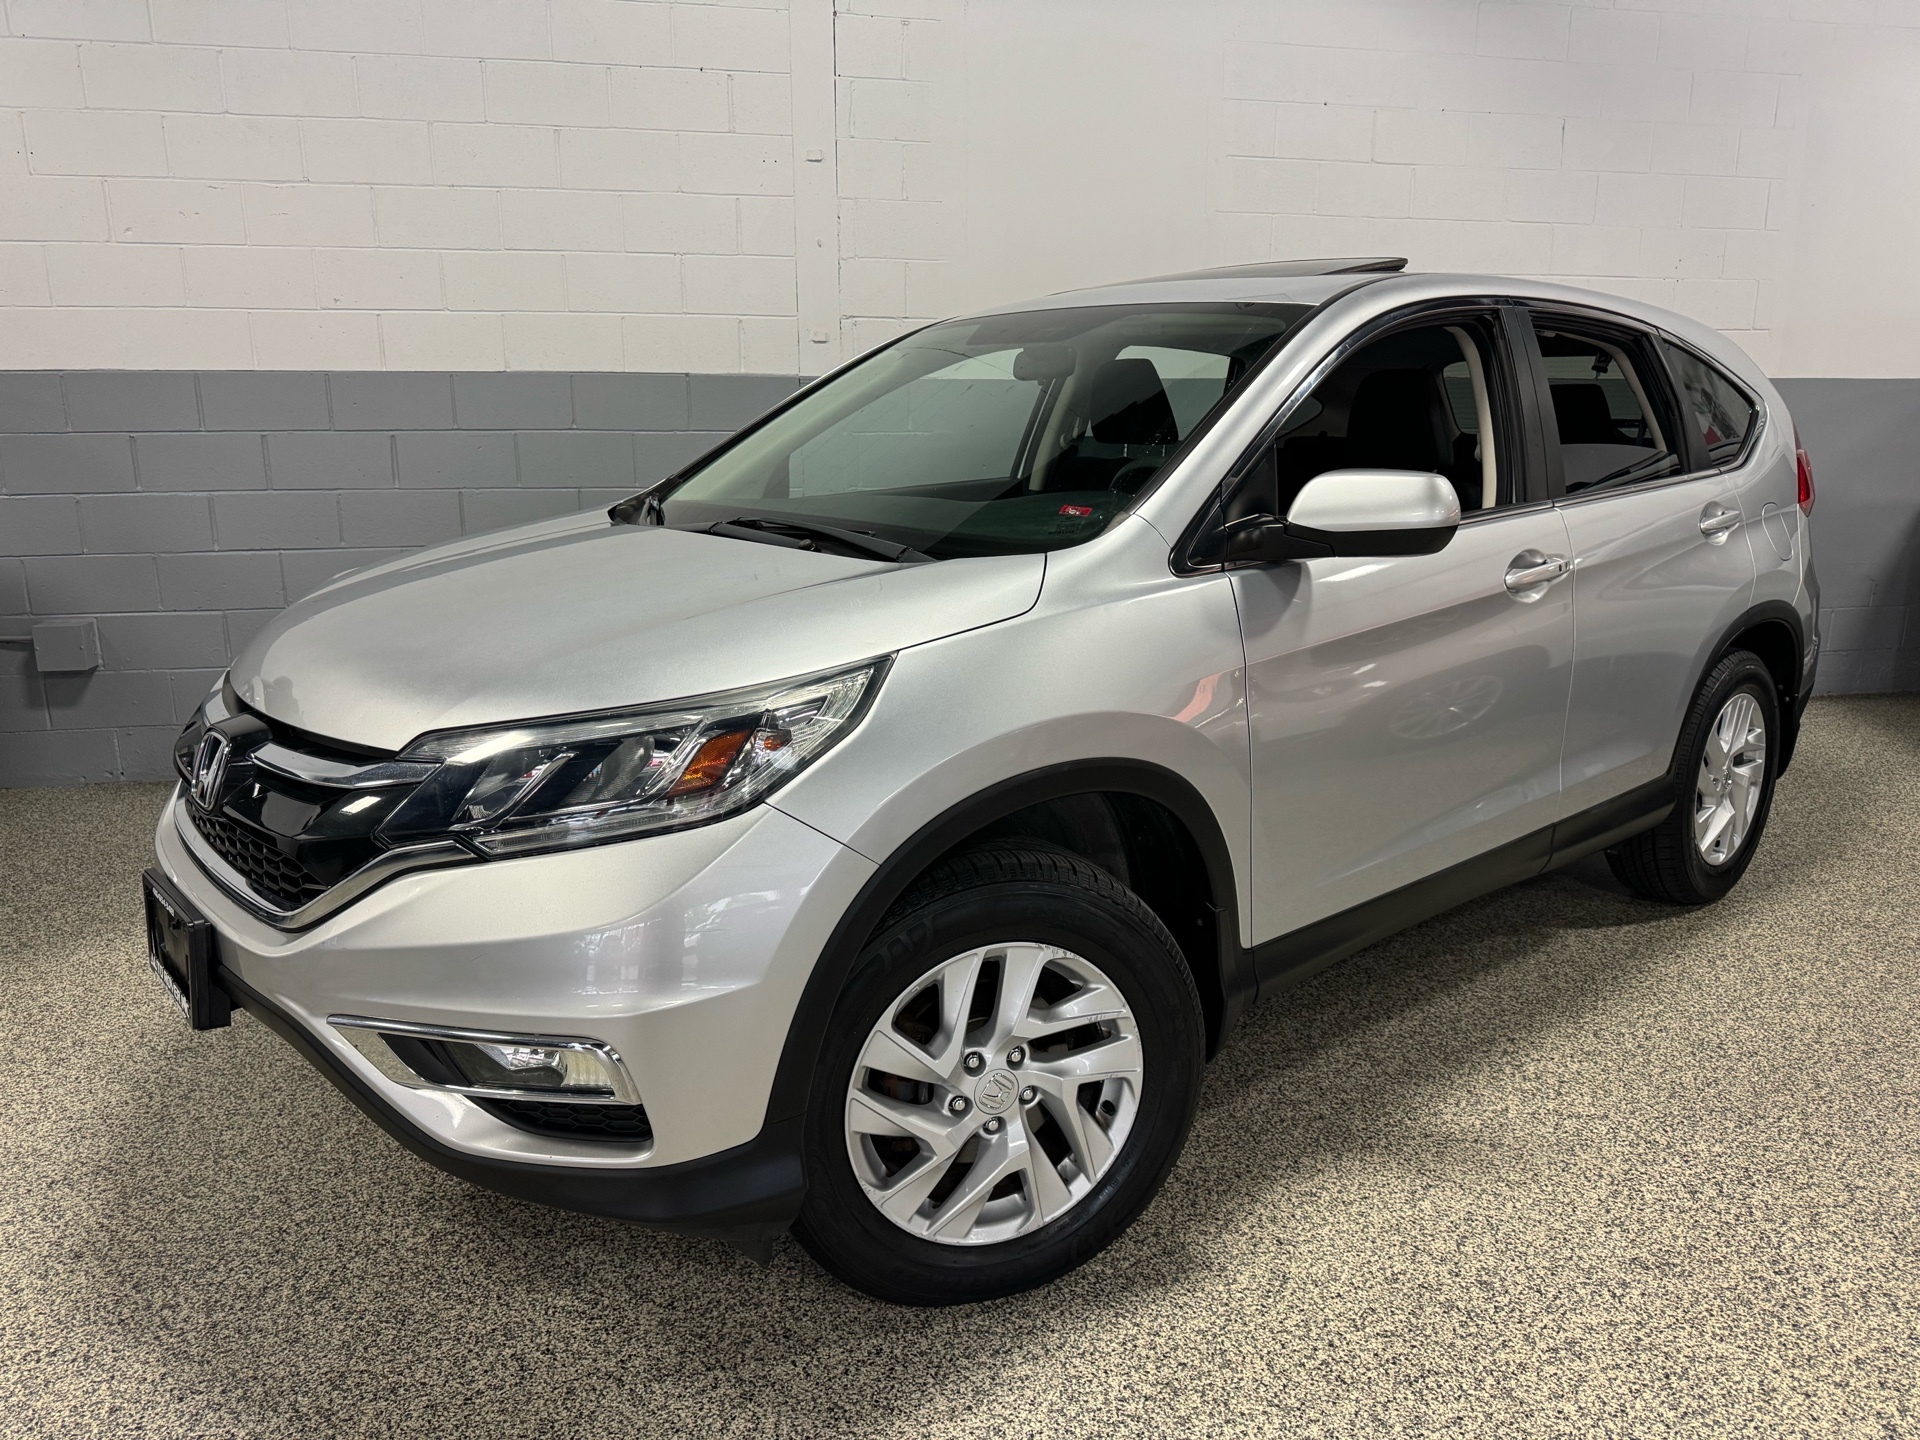 2015 Honda CR-V SPORT UTILITY/1 OWNER/NO ACCIDENTS/REARVIEW CAMERA